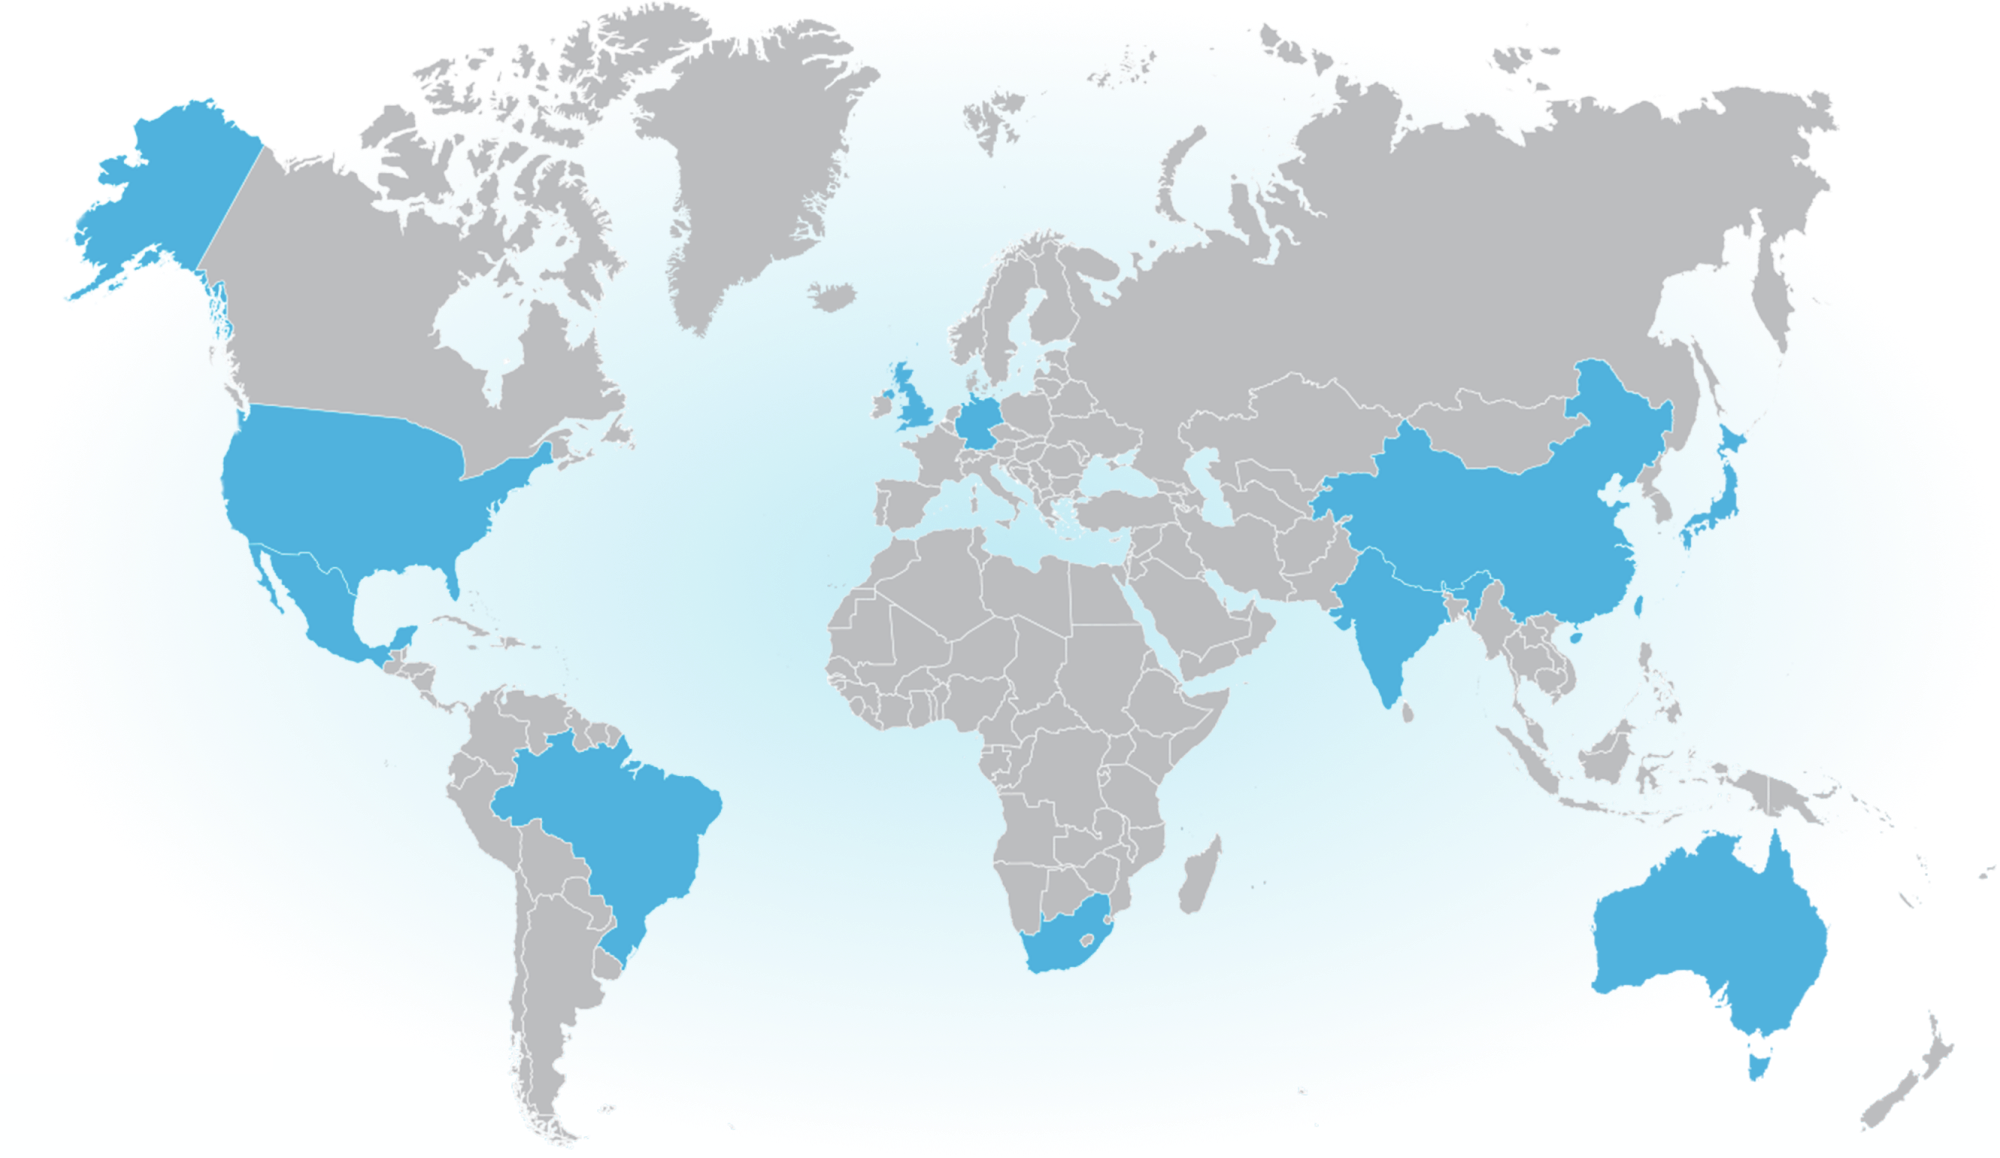 World map in gray highlighting select countries in blue: USA, Mexico, Brazil, UK, Germany, South Africa, India, China, Taiwan, Japan, Australia